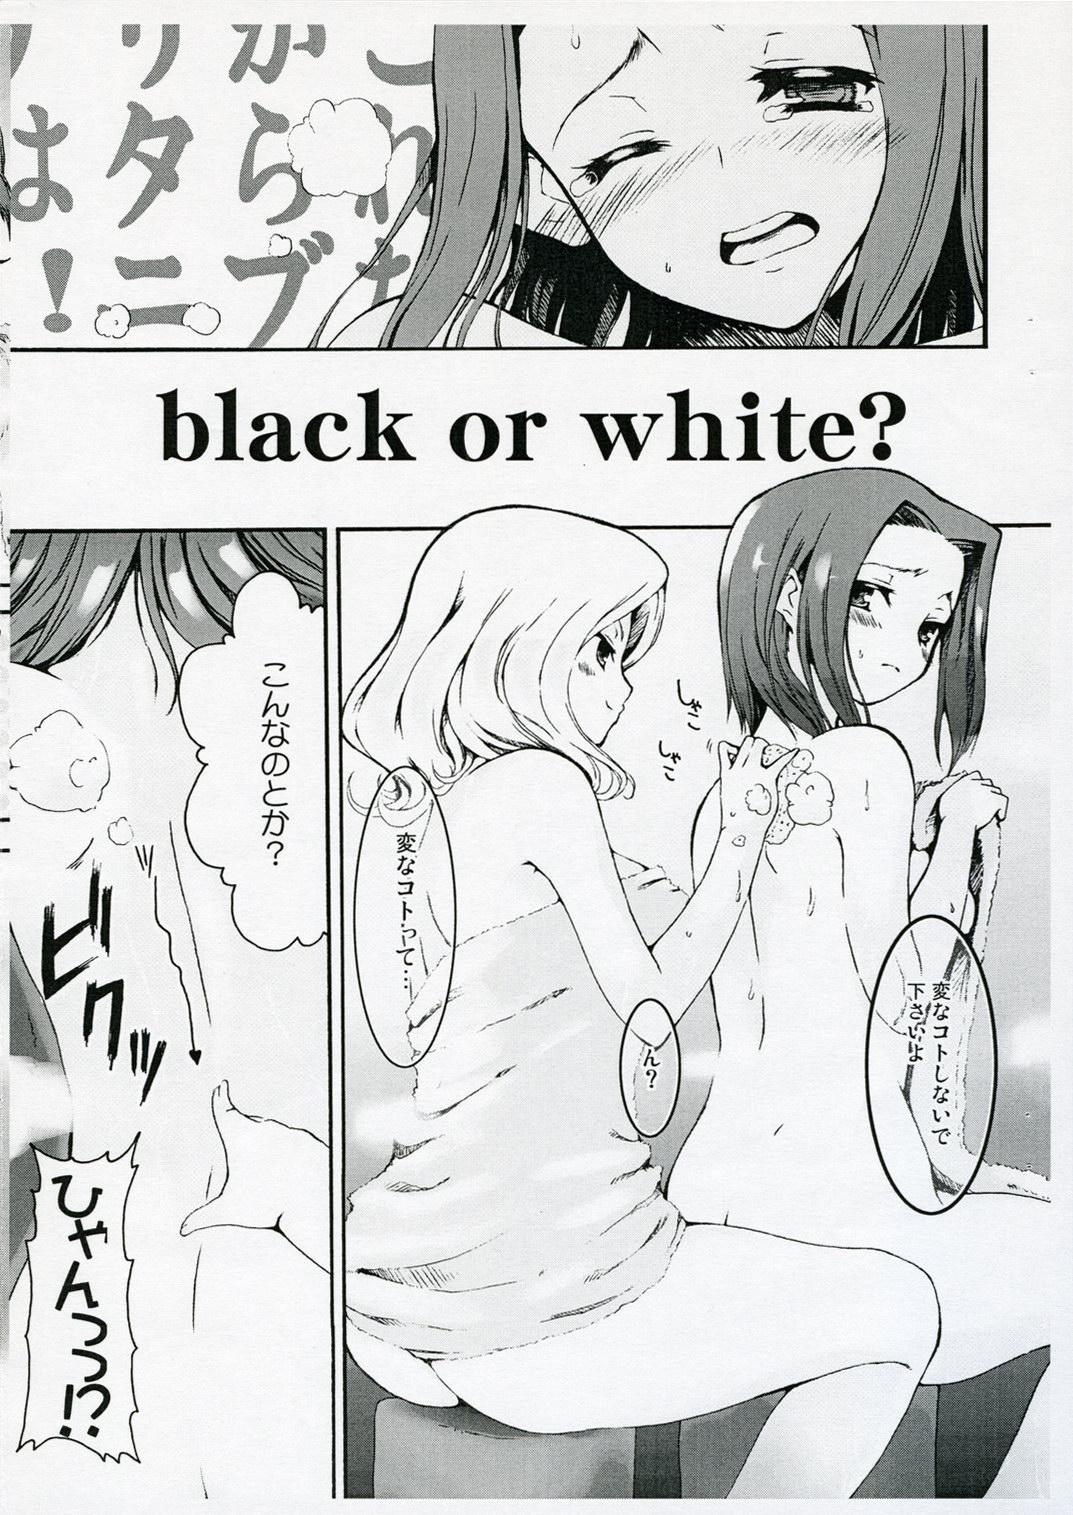 Sextape black or white? - Code geass Tattoo - Page 4